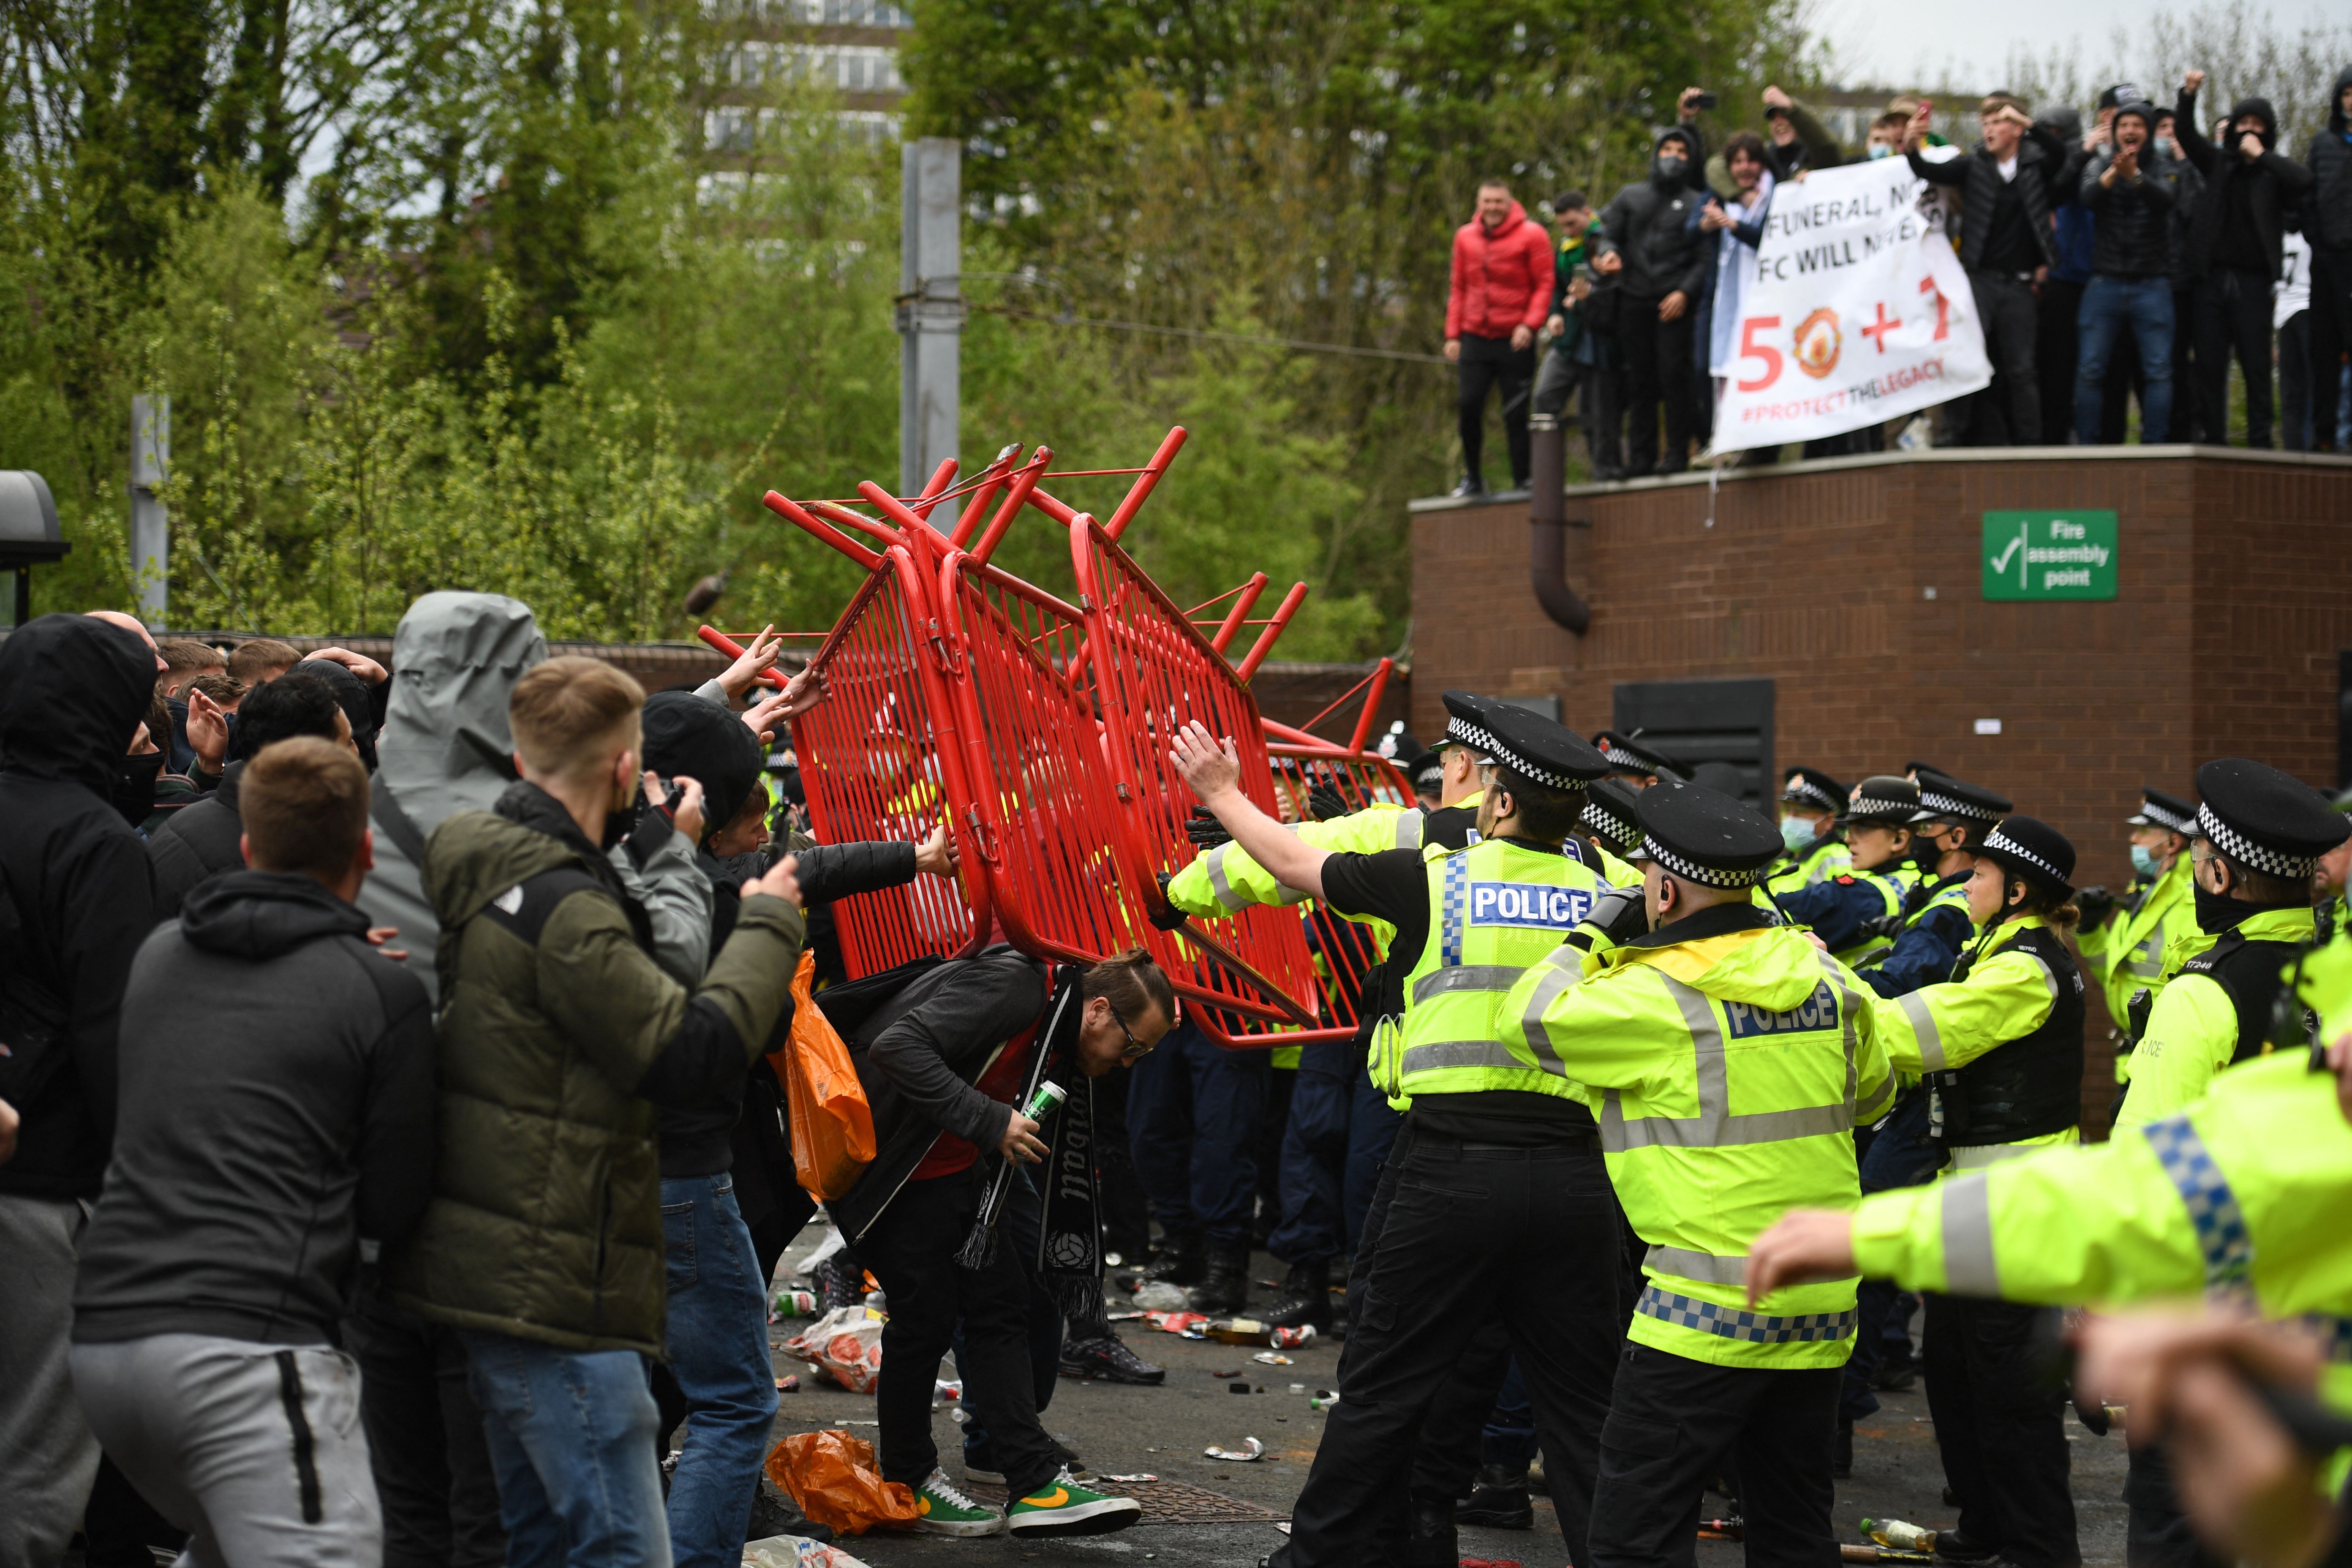 Police clashed with supporters outside Old Trafford